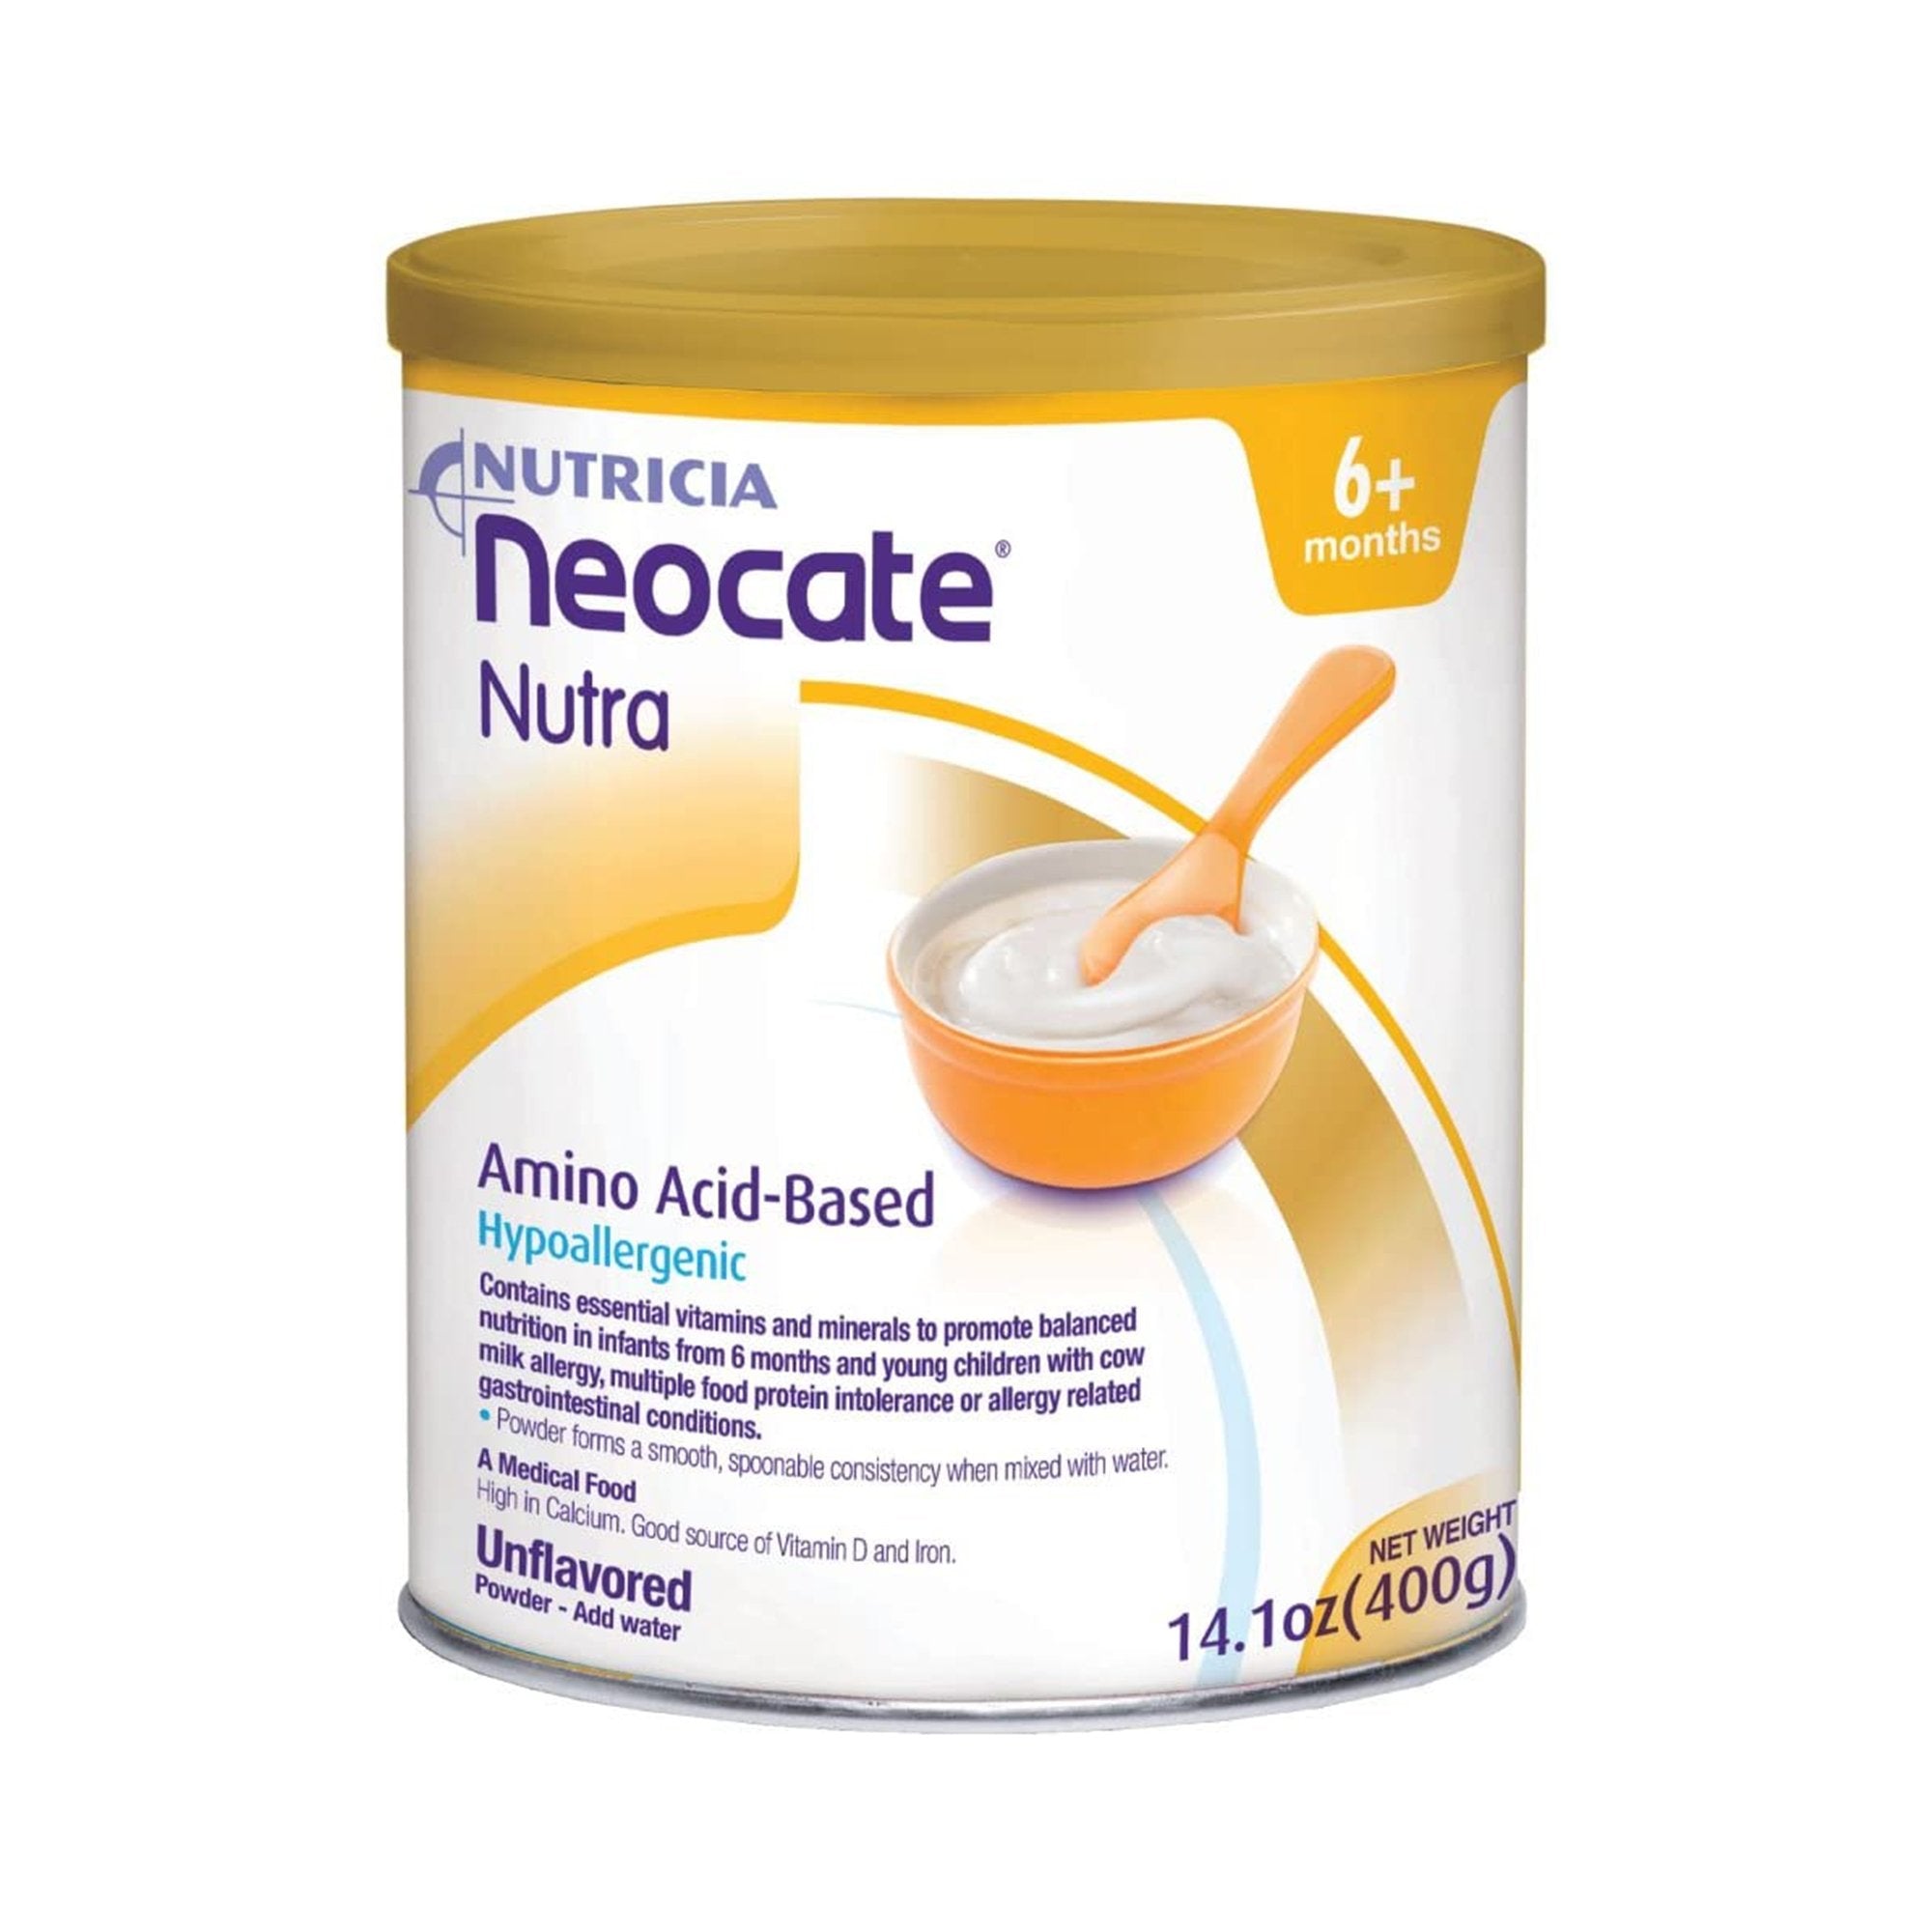 Neocate Nutra Amino Acid-Based Pediatric Oral Supplement, Unflavored, 14.1 oz. Can -Case of 4